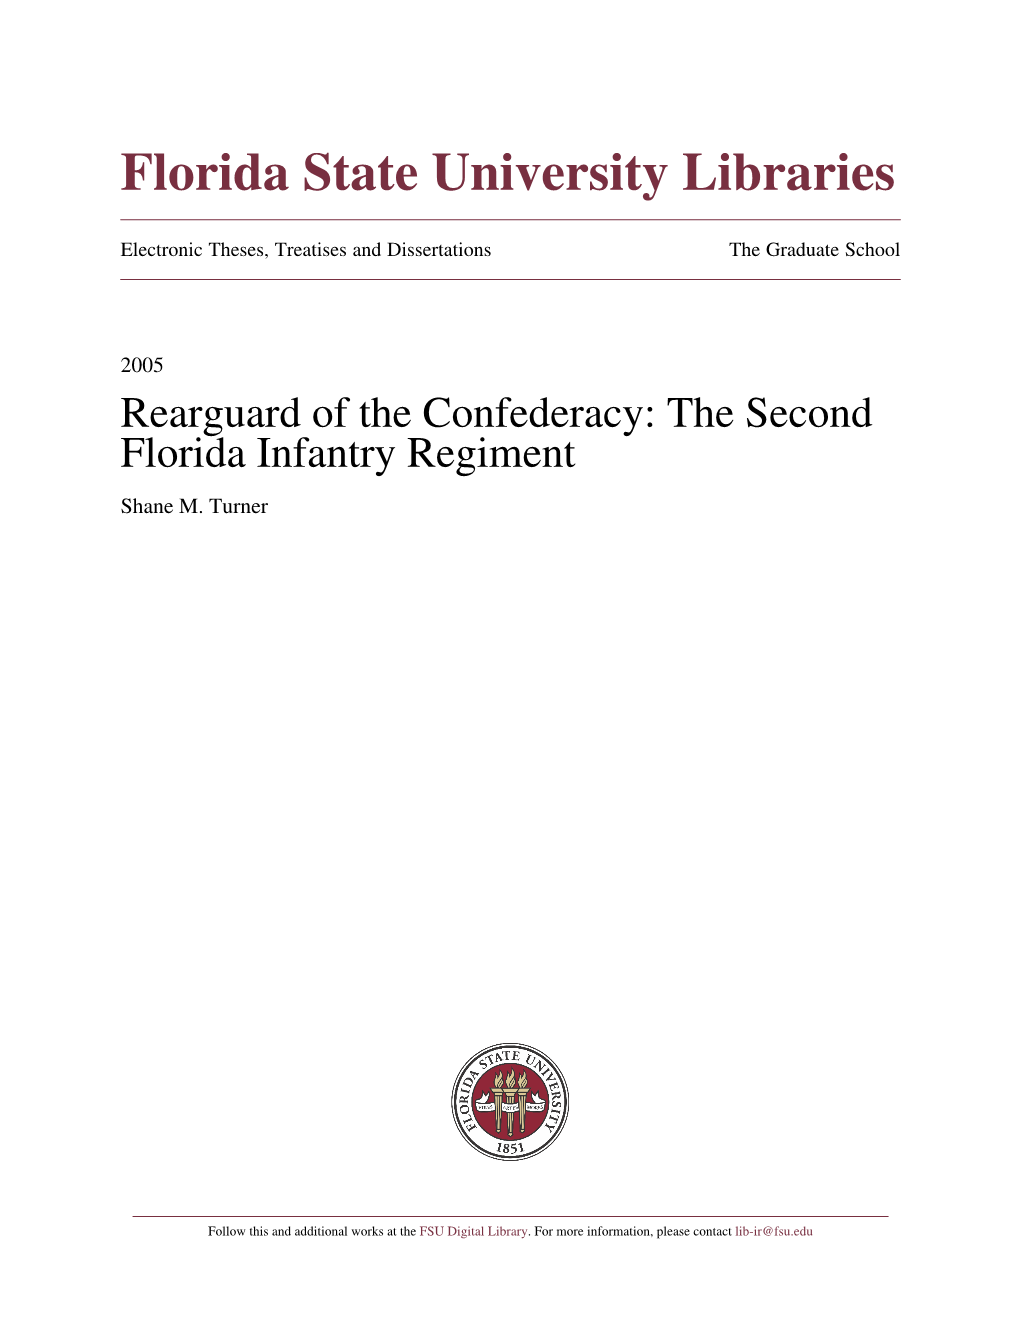 Rearguard of the Confederacy: the Second Florida Infantry Regiment Shane M